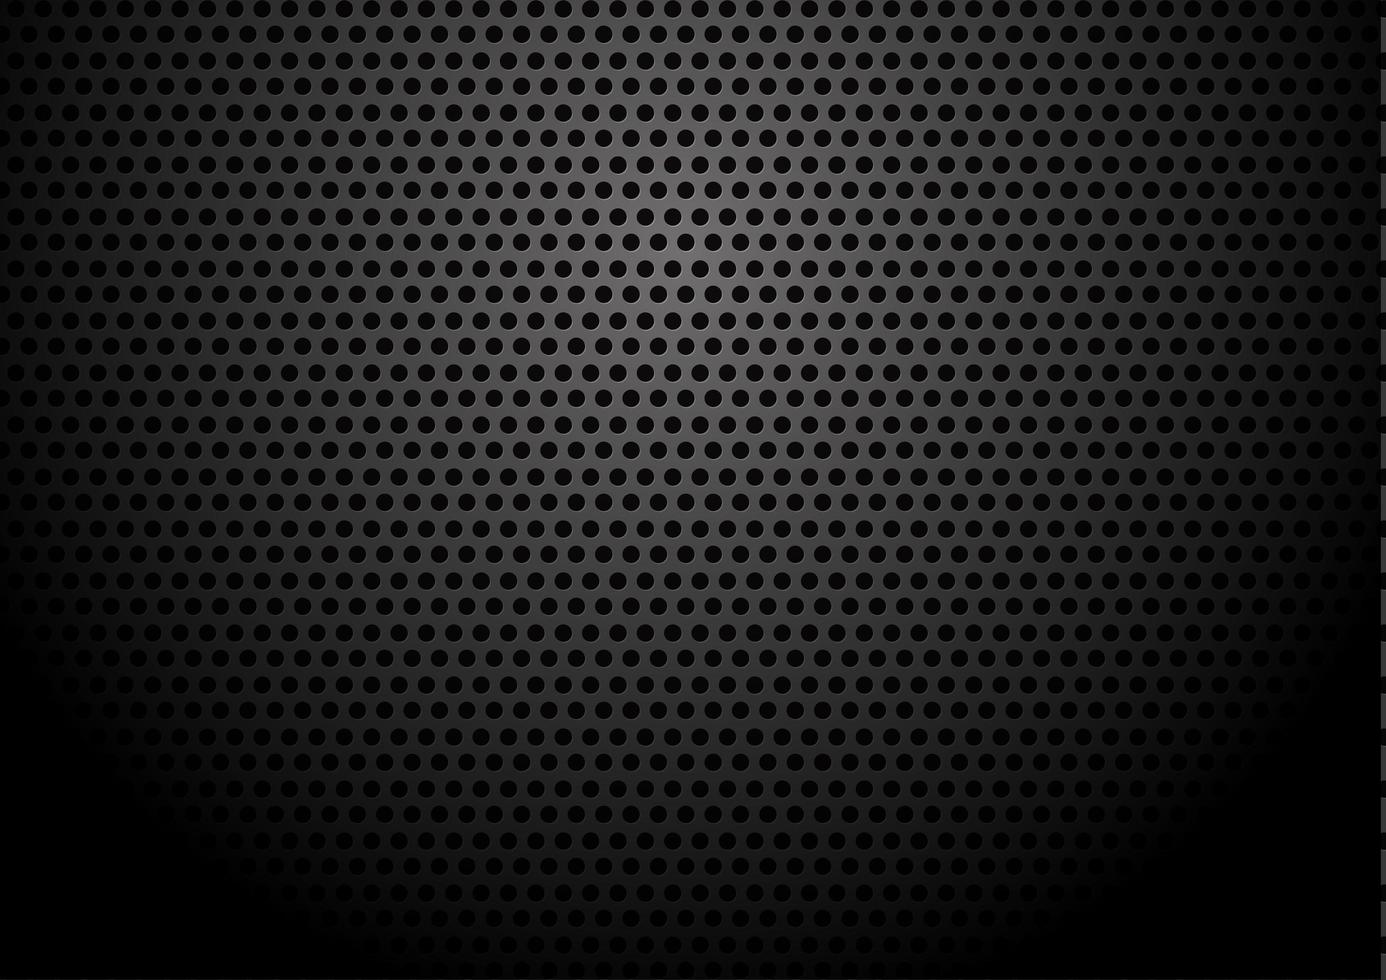 Metal plate grid with circular background texture. vector